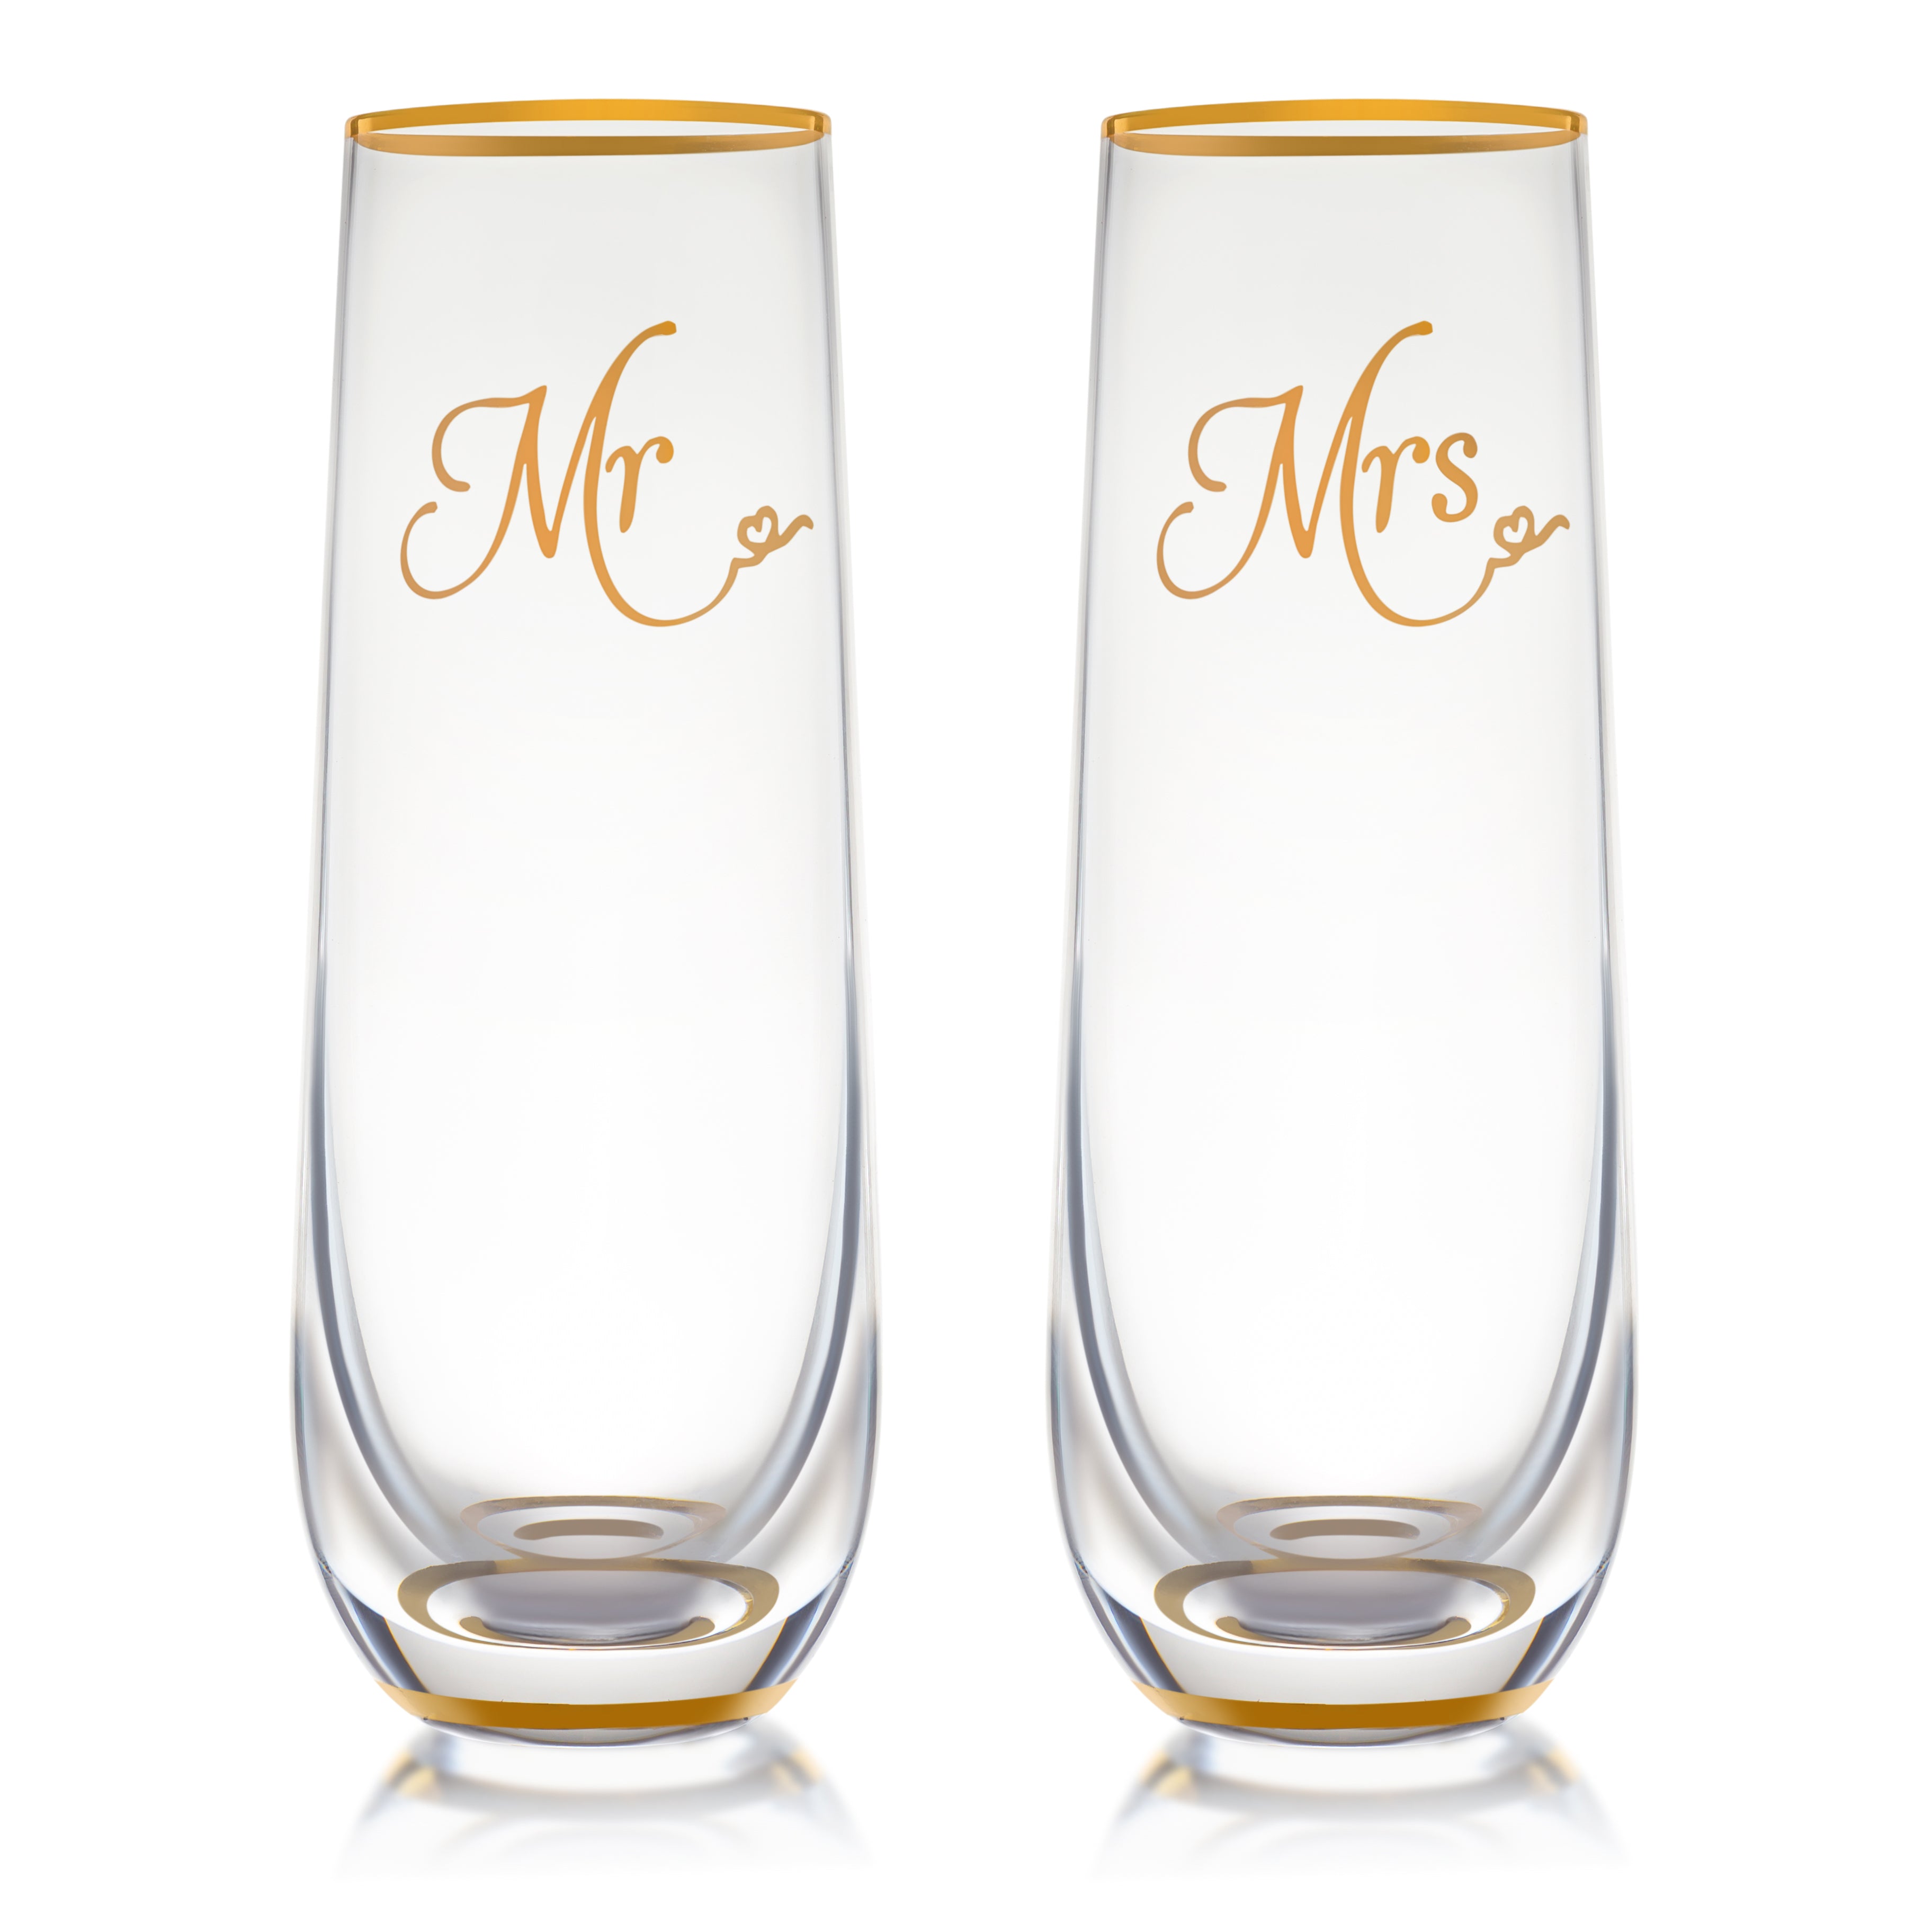 No Name No Seal Colorful Bubbly Drinking Glasses Set of 2, 11 oz (330 ml),  Stemless Champagne Glasse…See more No Name No Seal Colorful Bubbly Drinking